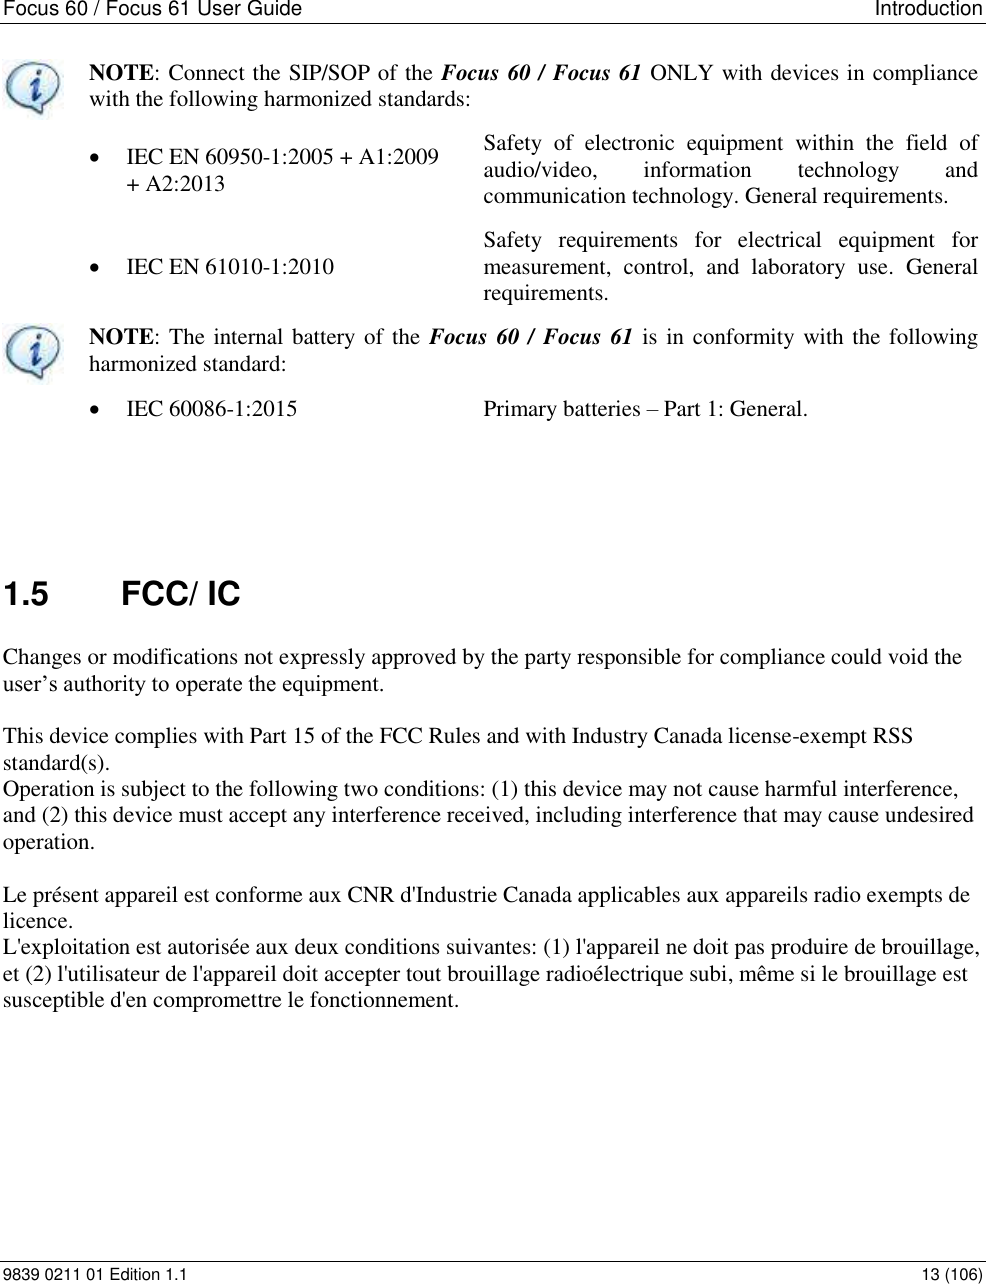 Focus 60 / Focus 61 User Guide   Introduction 9839 0211 01 Edition 1.1    13 (106)  NOTE: Connect the SIP/SOP of the Focus 60 / Focus 61 ONLY with devices in compliance with the following harmonized standards:  IEC EN 60950-1:2005 + A1:2009  + A2:2013 Safety  of  electronic  equipment  within  the  field  of audio/video,  information  technology  and communication technology. General requirements.  IEC EN 61010-1:2010 Safety  requirements  for  electrical  equipment  for measurement,  control,  and  laboratory  use.  General requirements.  NOTE: The internal battery of the  Focus 60 / Focus 61 is in conformity with the following harmonized standard:  IEC 60086-1:2015 Primary batteries – Part 1: General.     1.5  FCC/ IC Changes or modifications not expressly approved by the party responsible for compliance could void the user’s authority to operate the equipment.  This device complies with Part 15 of the FCC Rules and with Industry Canada license-exempt RSS standard(s).   Operation is subject to the following two conditions: (1) this device may not cause harmful interference, and (2) this device must accept any interference received, including interference that may cause undesired operation.  Le présent appareil est conforme aux CNR d&apos;Industrie Canada applicables aux appareils radio exempts de licence. L&apos;exploitation est autorisée aux deux conditions suivantes: (1) l&apos;appareil ne doit pas produire de brouillage, et (2) l&apos;utilisateur de l&apos;appareil doit accepter tout brouillage radioélectrique subi, même si le brouillage est susceptible d&apos;en compromettre le fonctionnement.  